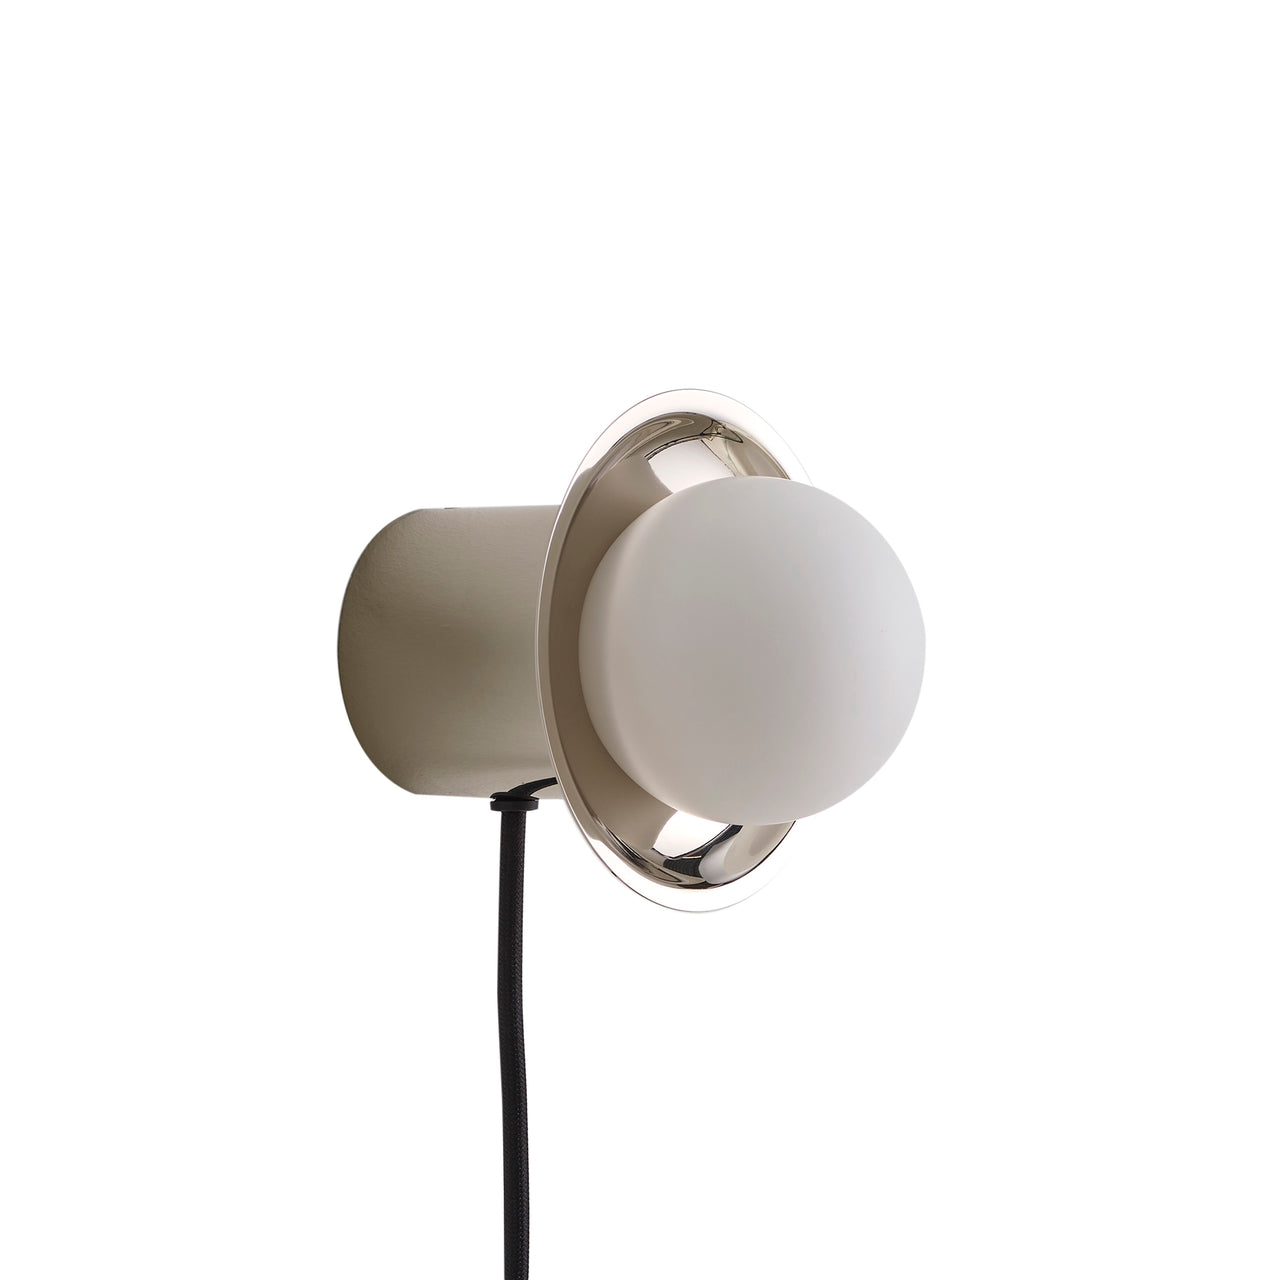 Janed Wall Light with Cable: Polished Nickel + Satin Nickel